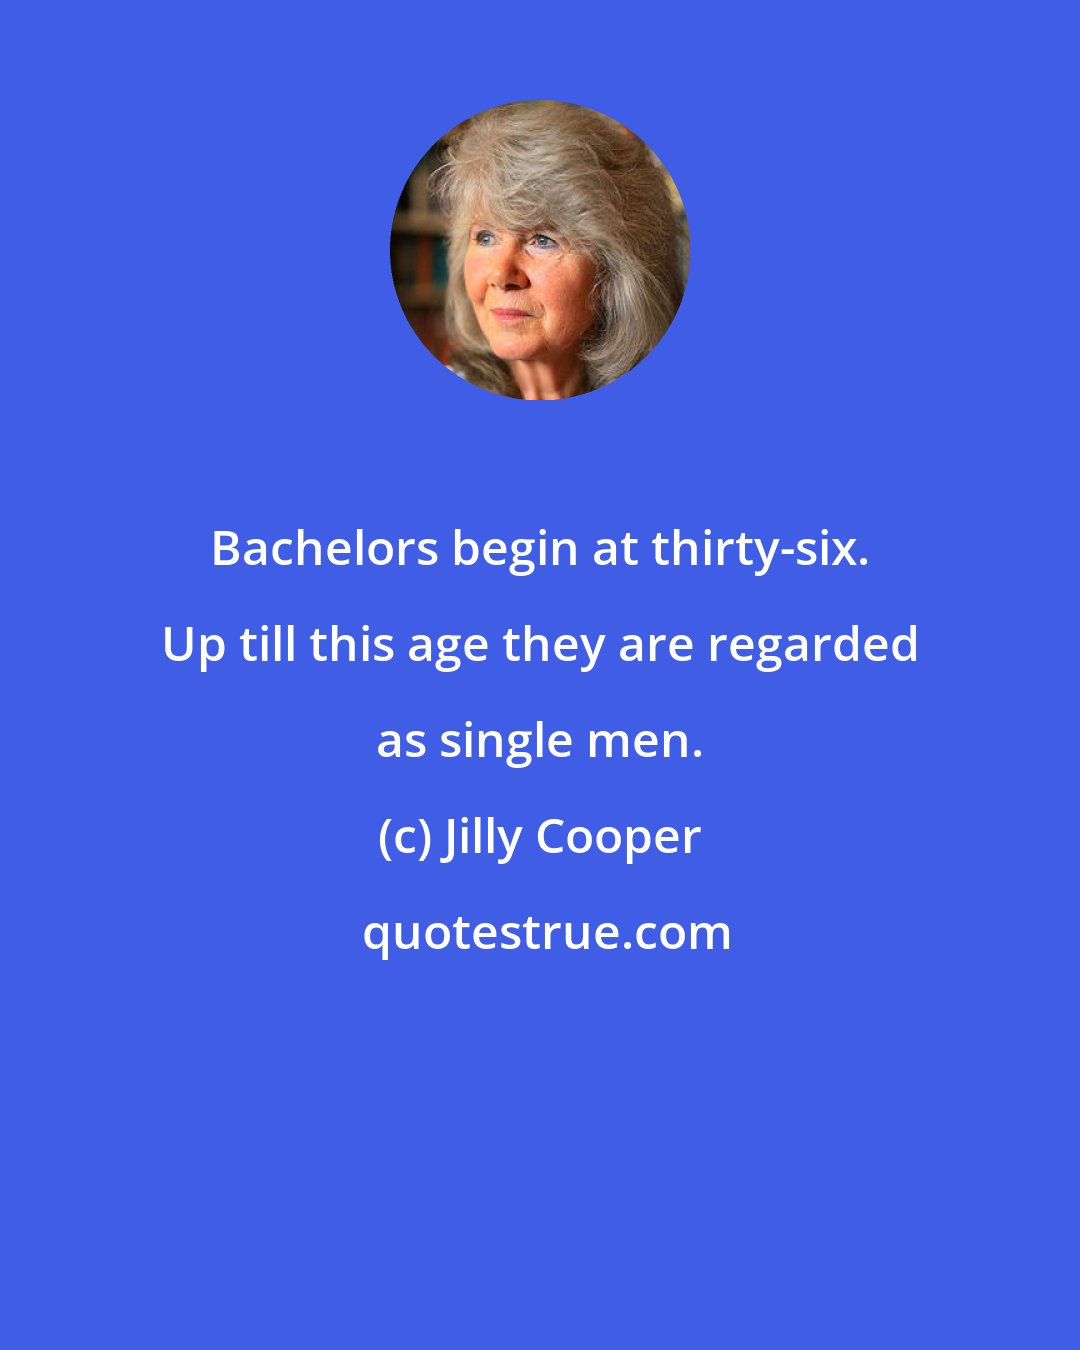 Jilly Cooper: Bachelors begin at thirty-six. Up till this age they are regarded as single men.